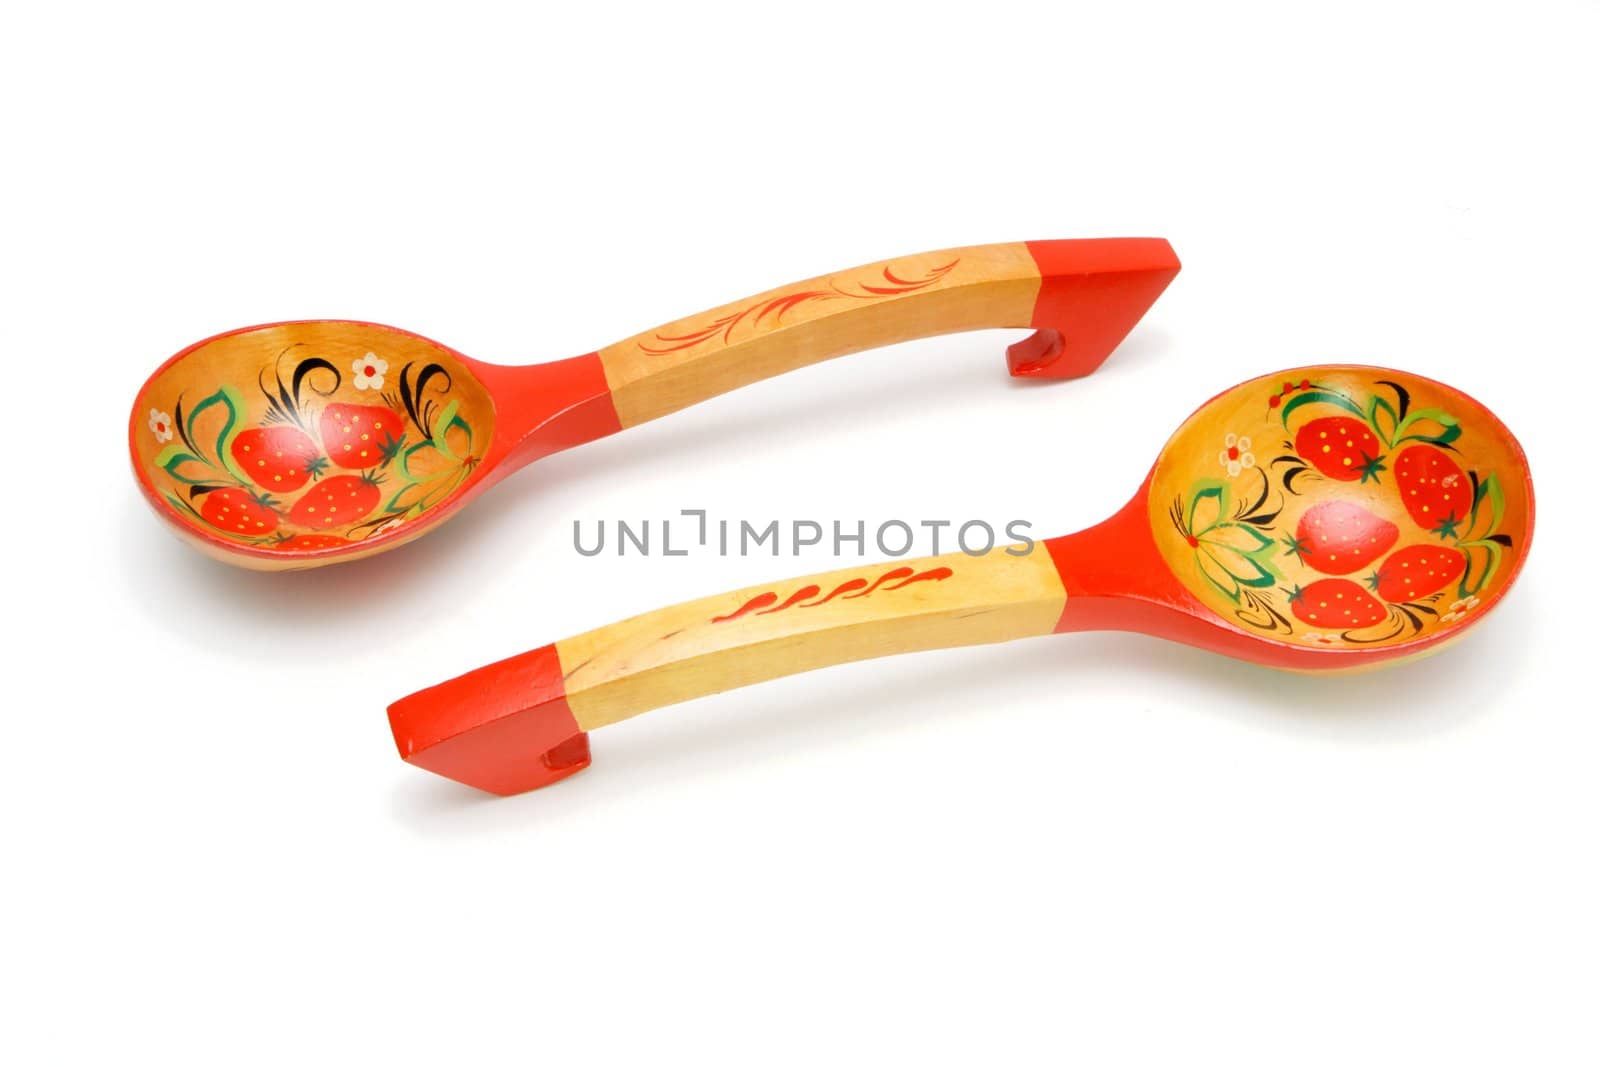 Two wooden Russian hand-painted spoons wih curved handles on white background